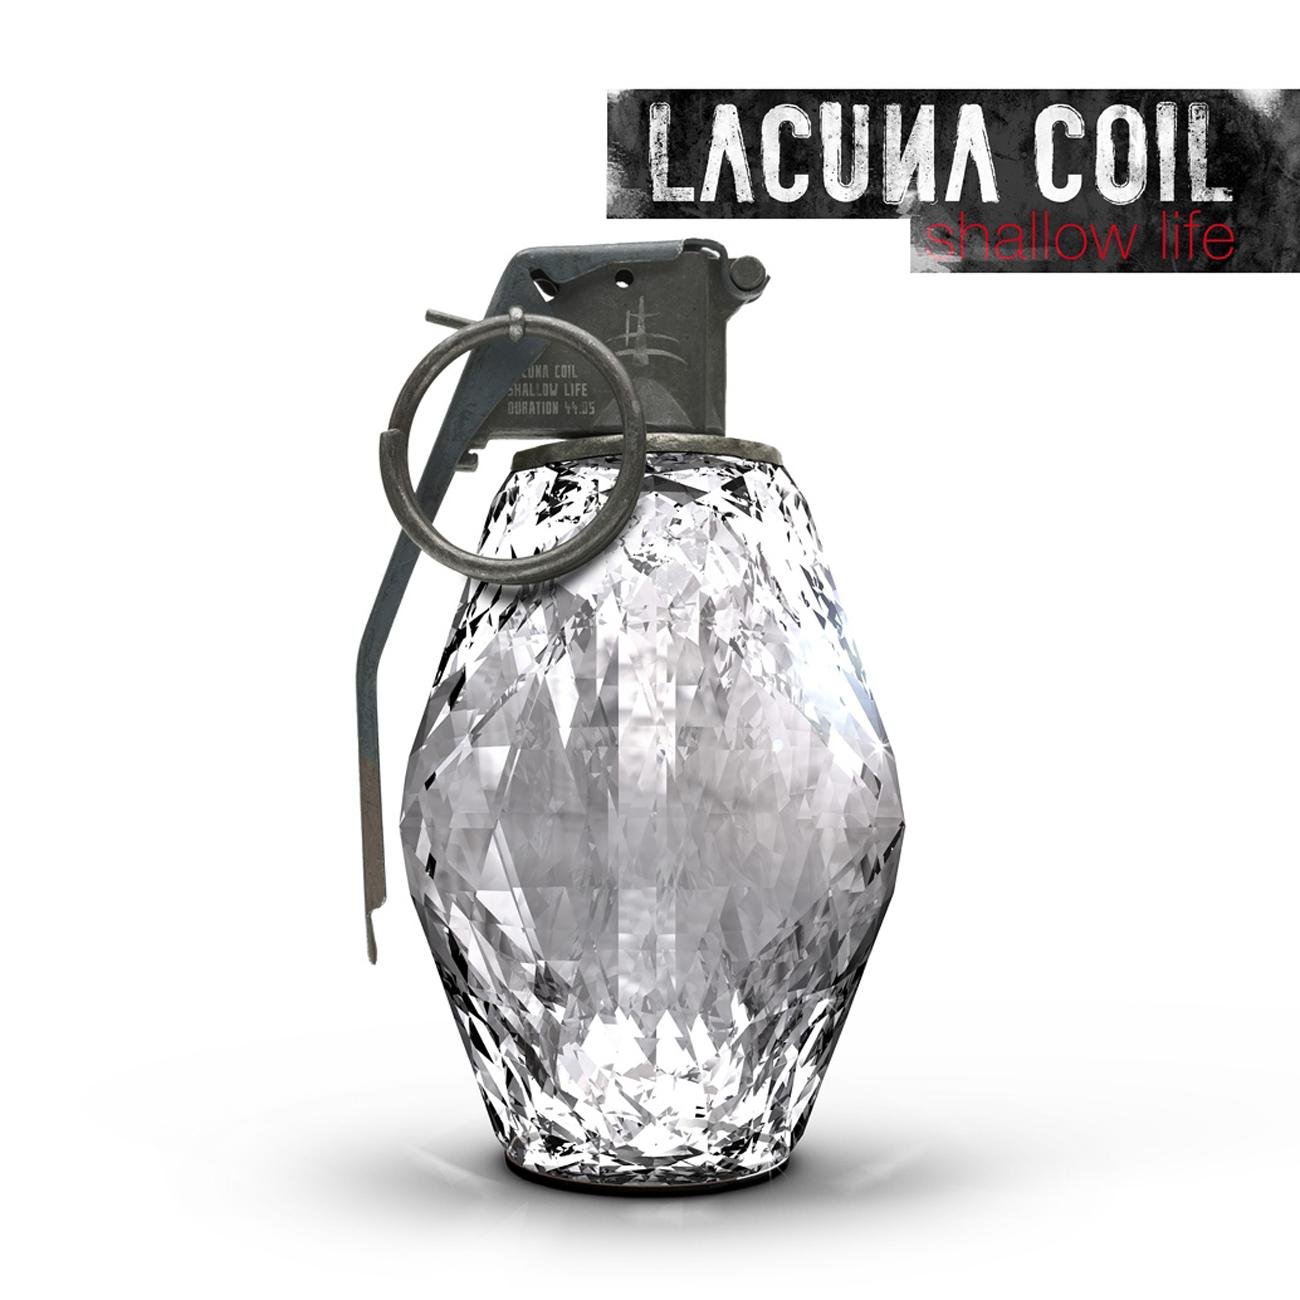 CD Lacuna Coil - Shallow life